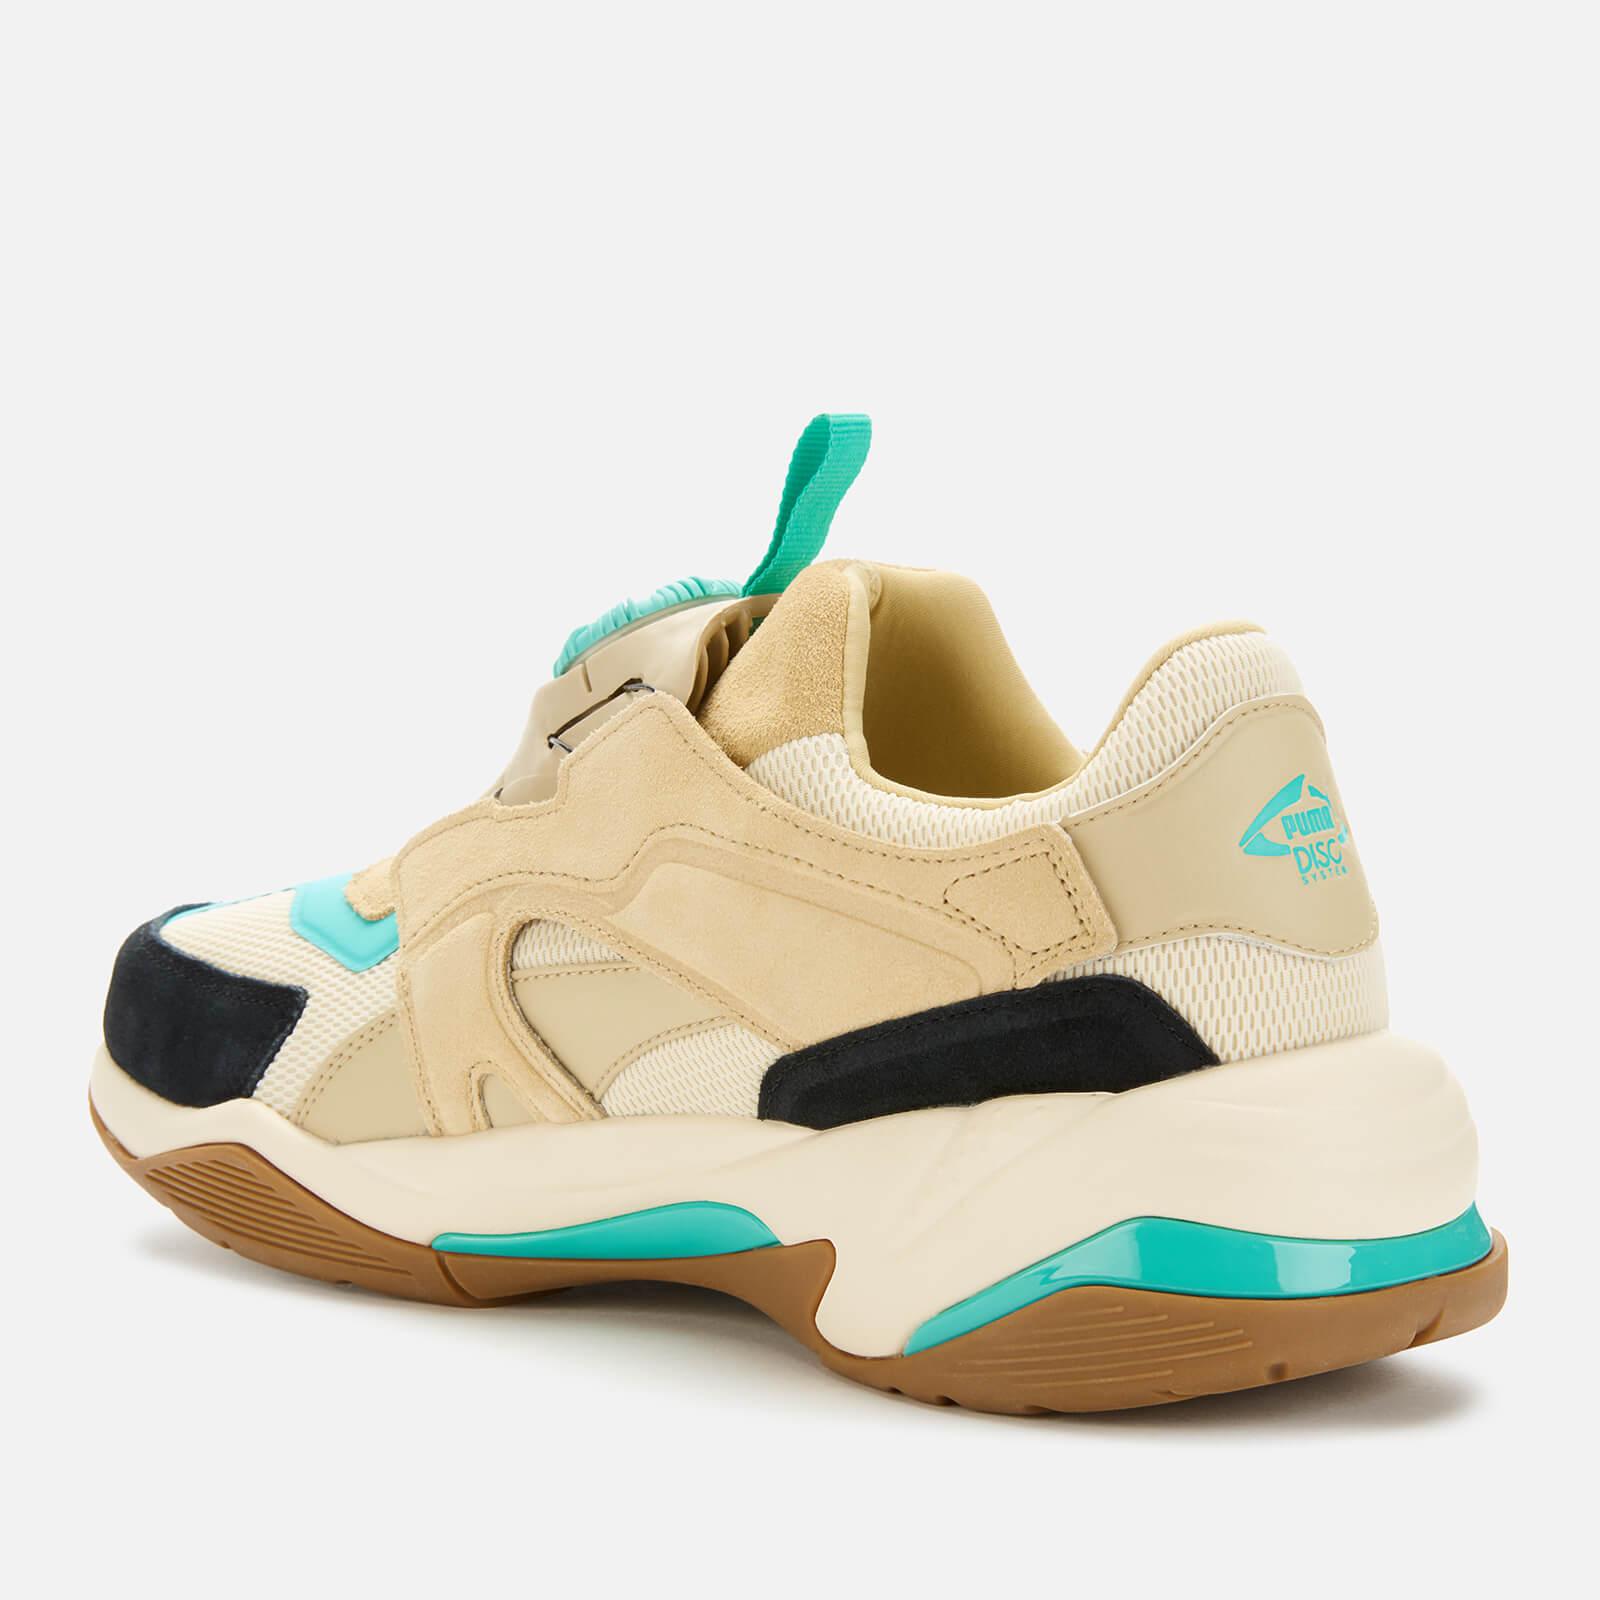 PUMA Thunder Disc Trainers for Men - Lyst